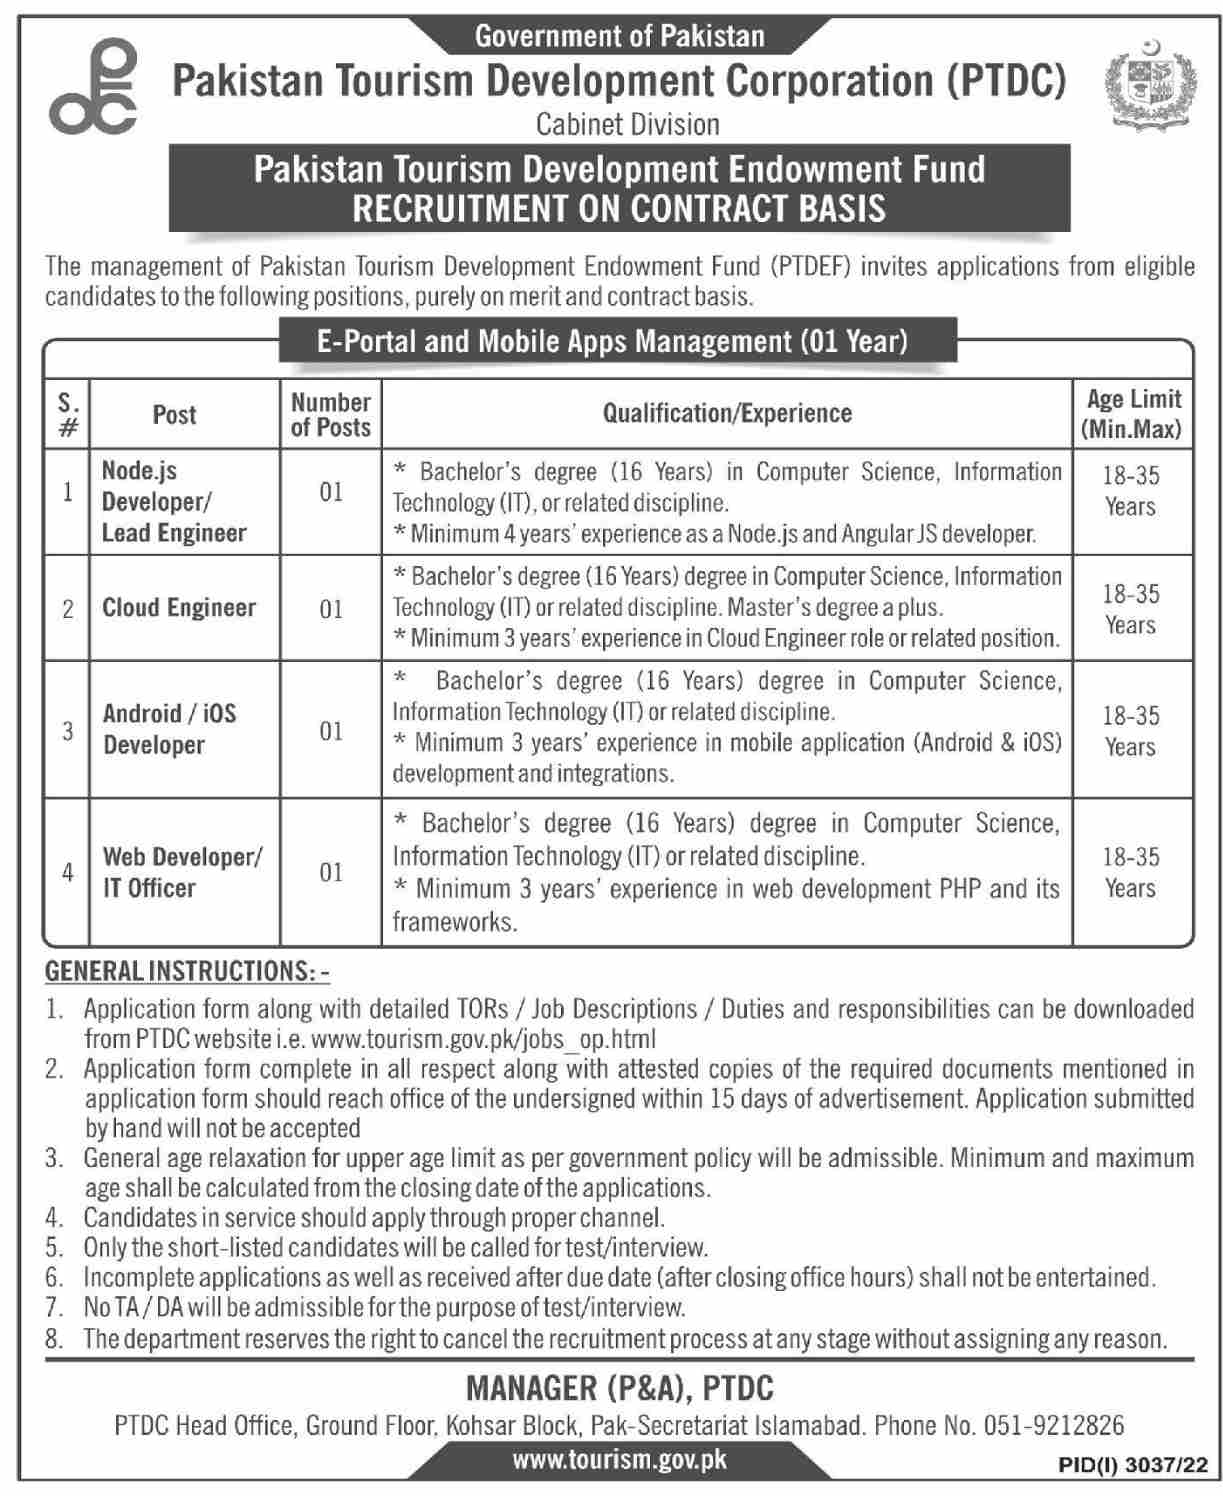 Career Opportunities at PTDC 2022